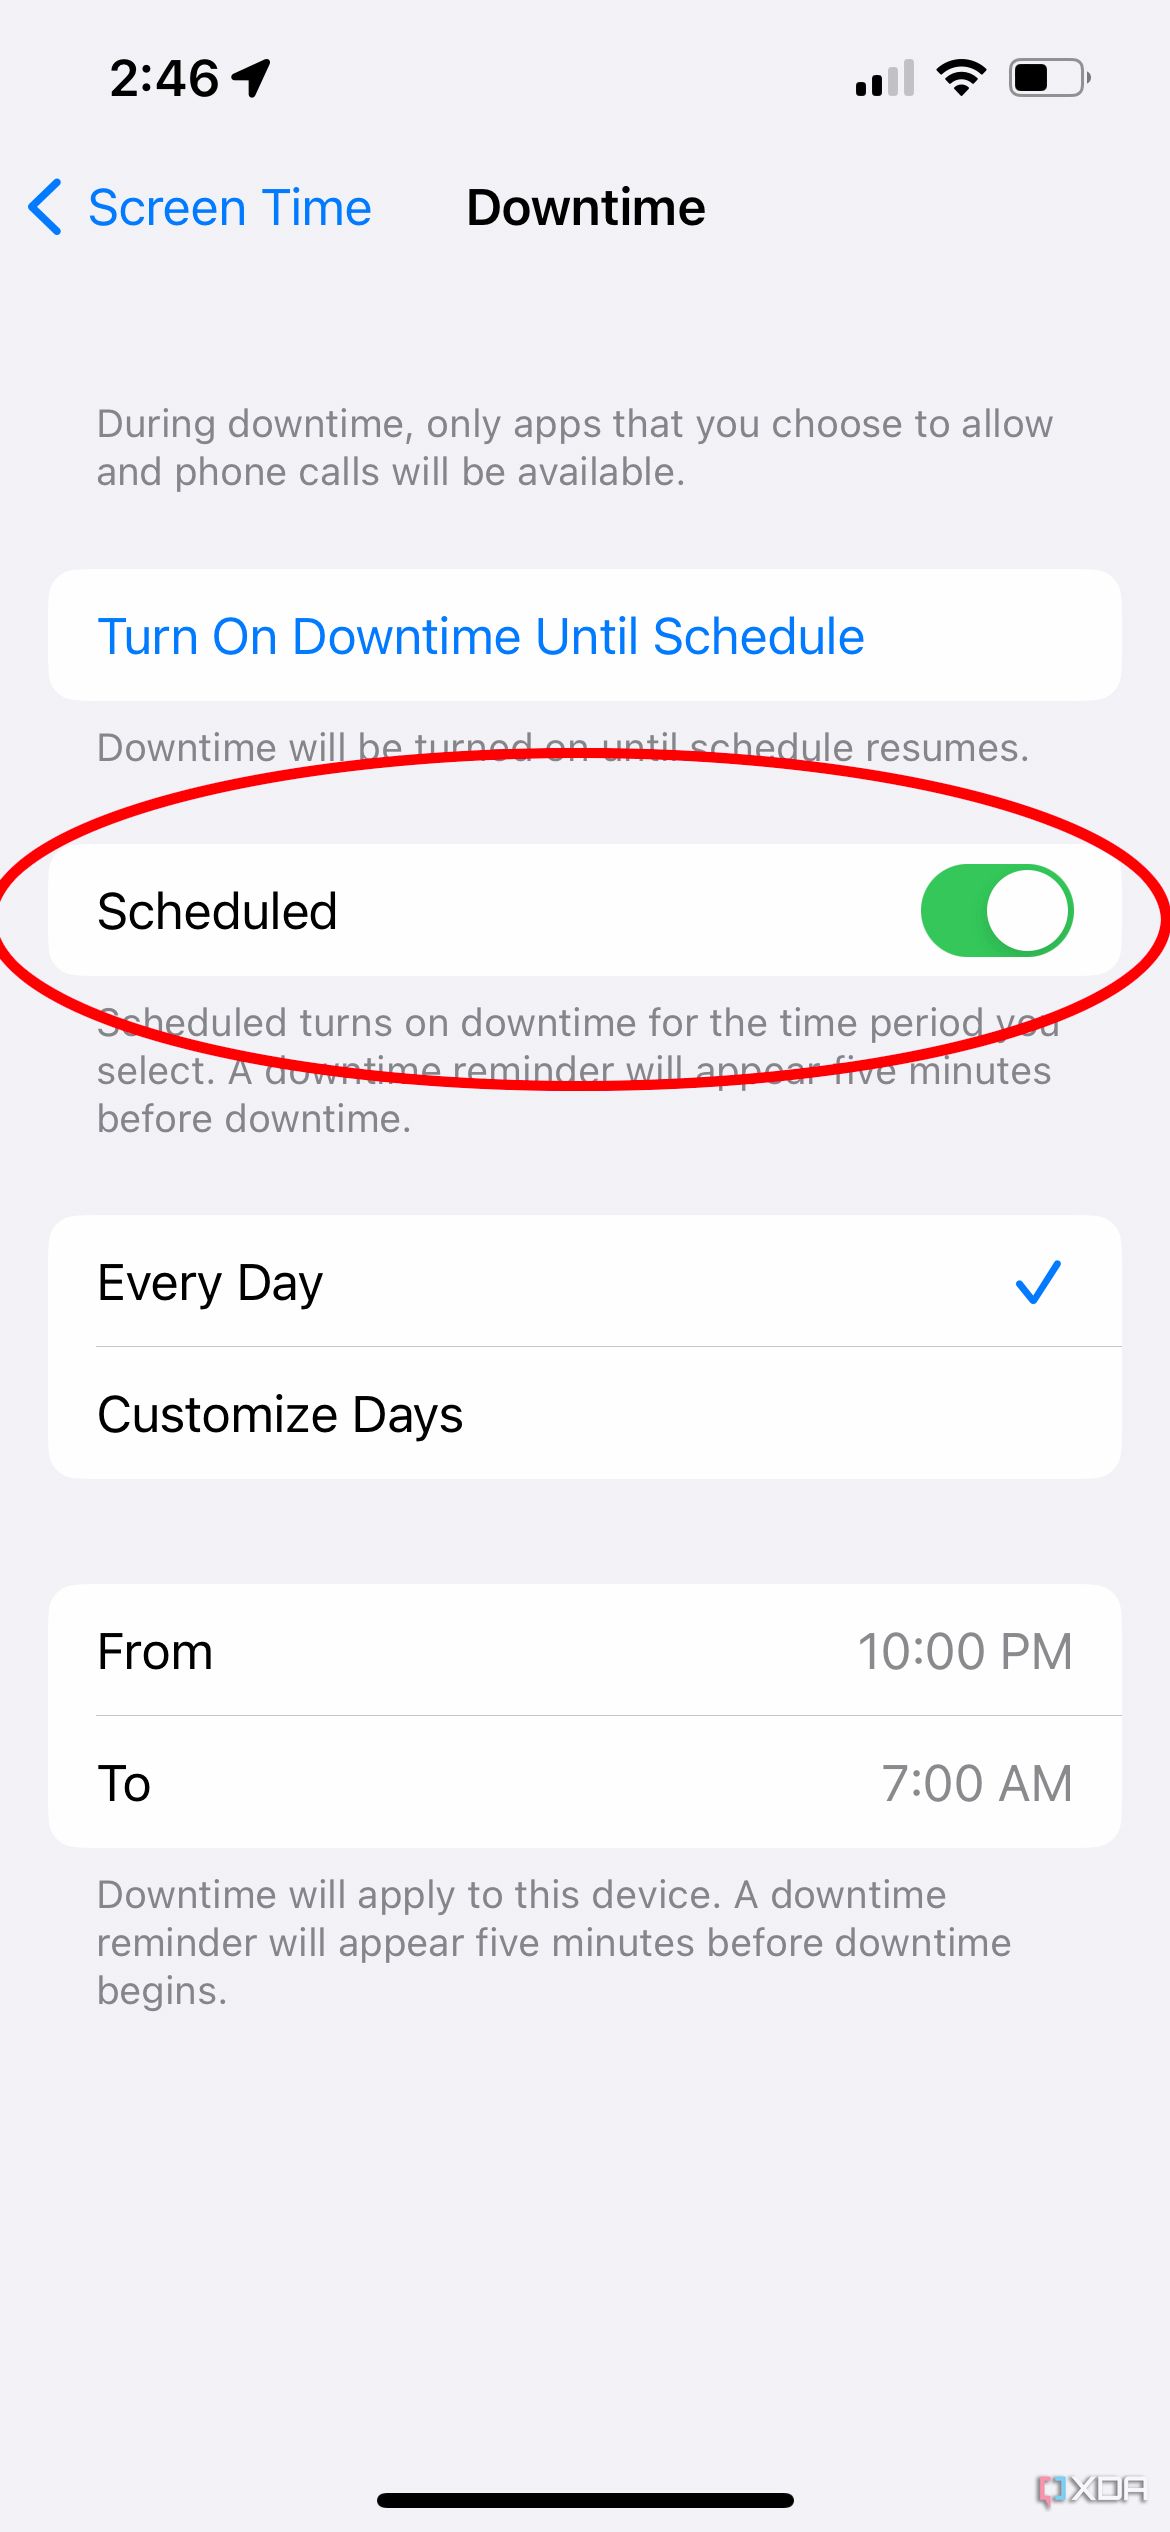 iphone screen time downtime schedule